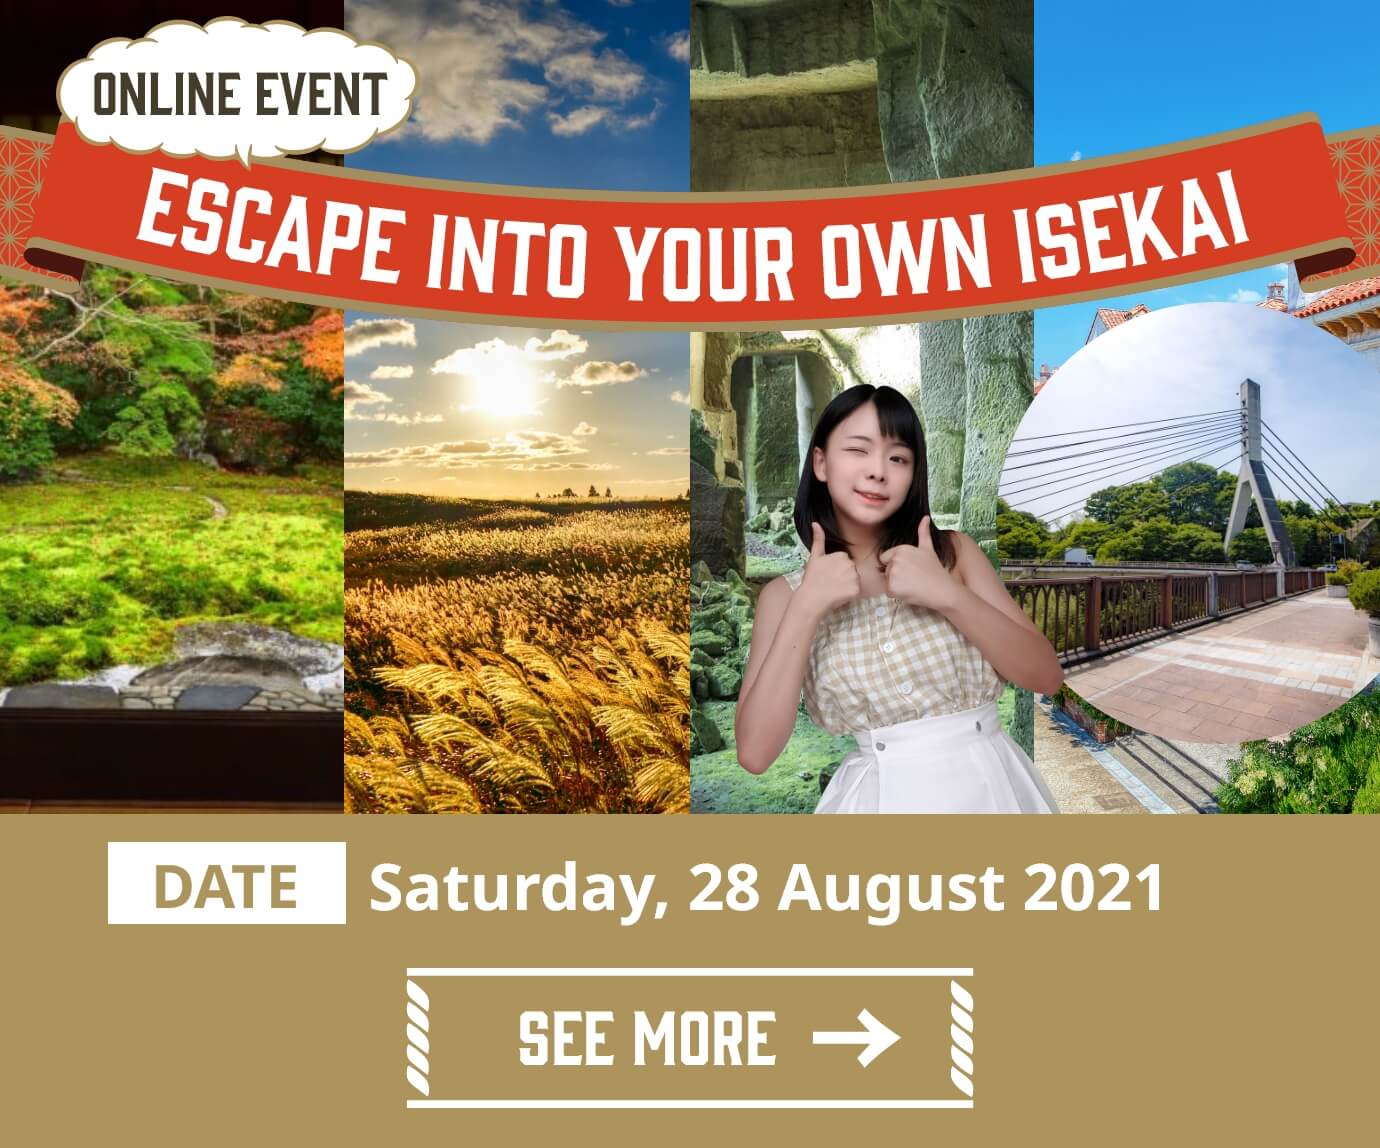 ONLINE EVENT ESCAPE INTO YOUR OWN ISEKAI DATE:Saturday, 28 August 2021